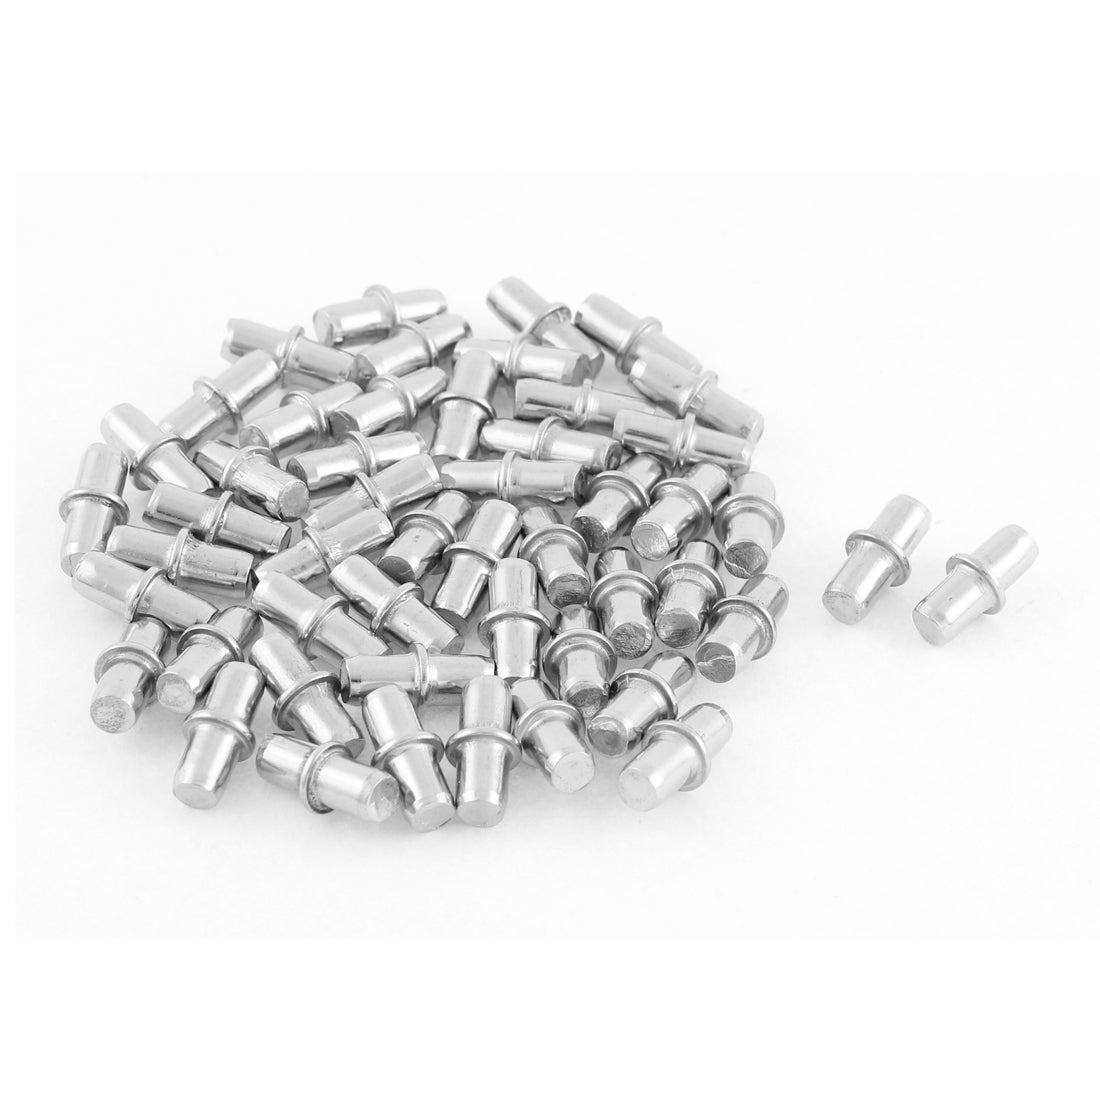 uxcell Uxcell 5mm x 15mm Furniture Cupboard Hardware Metal Shelf Support Pins Silver Tone 50 Pcs